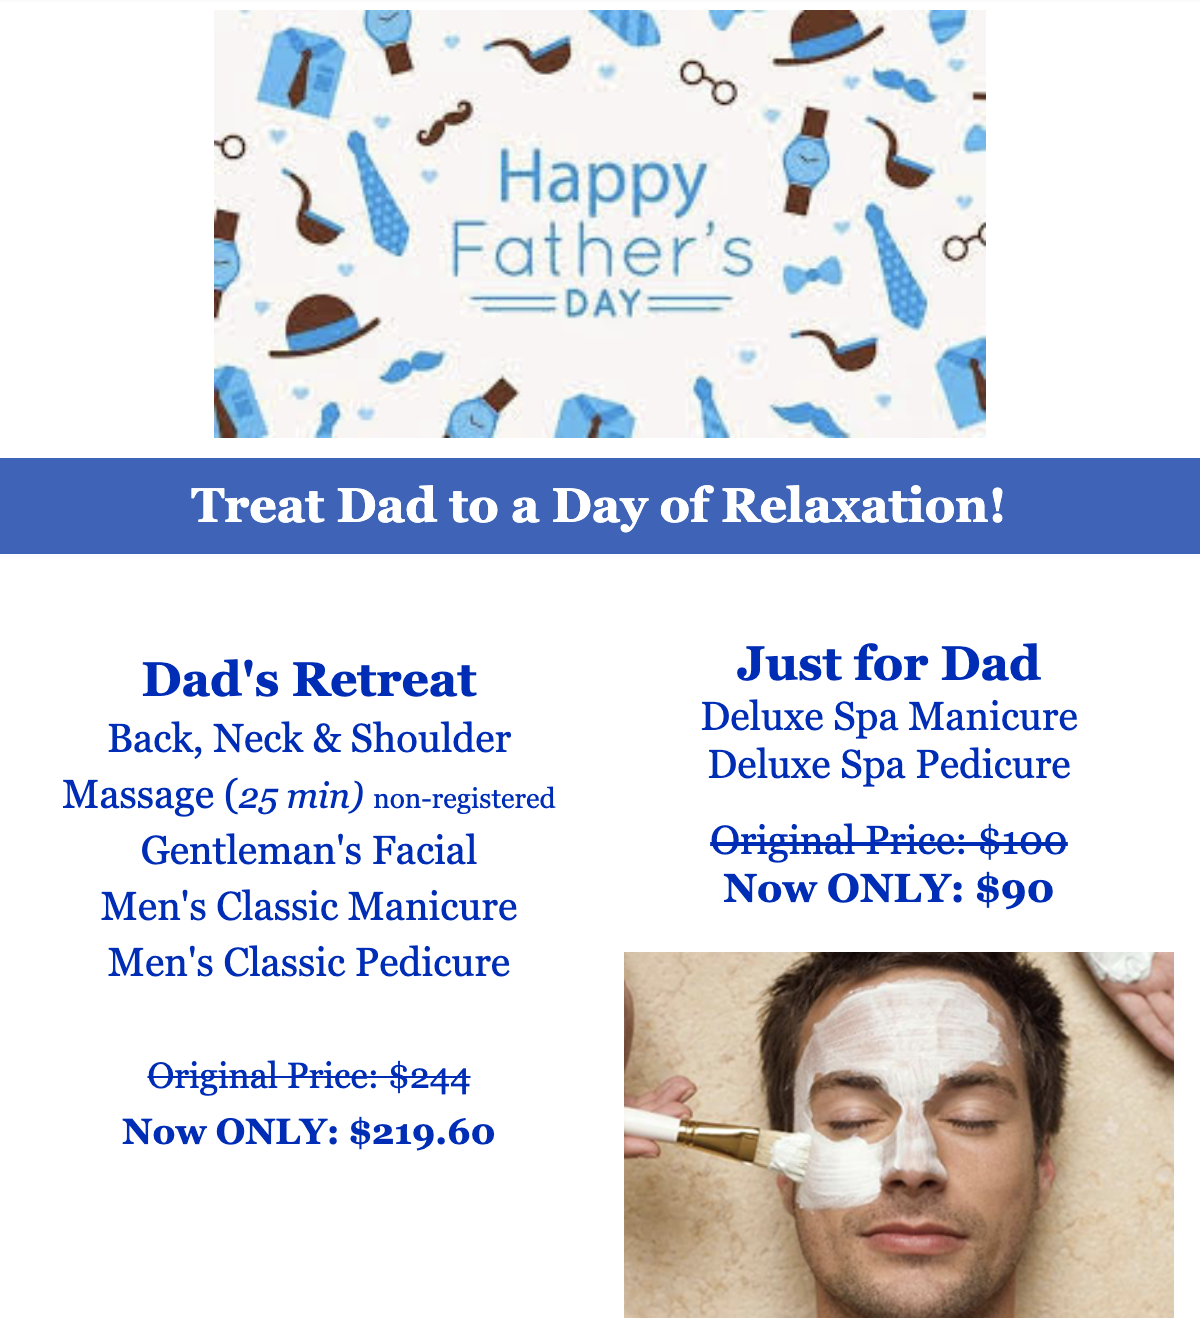 Special Packages for Father's Day!